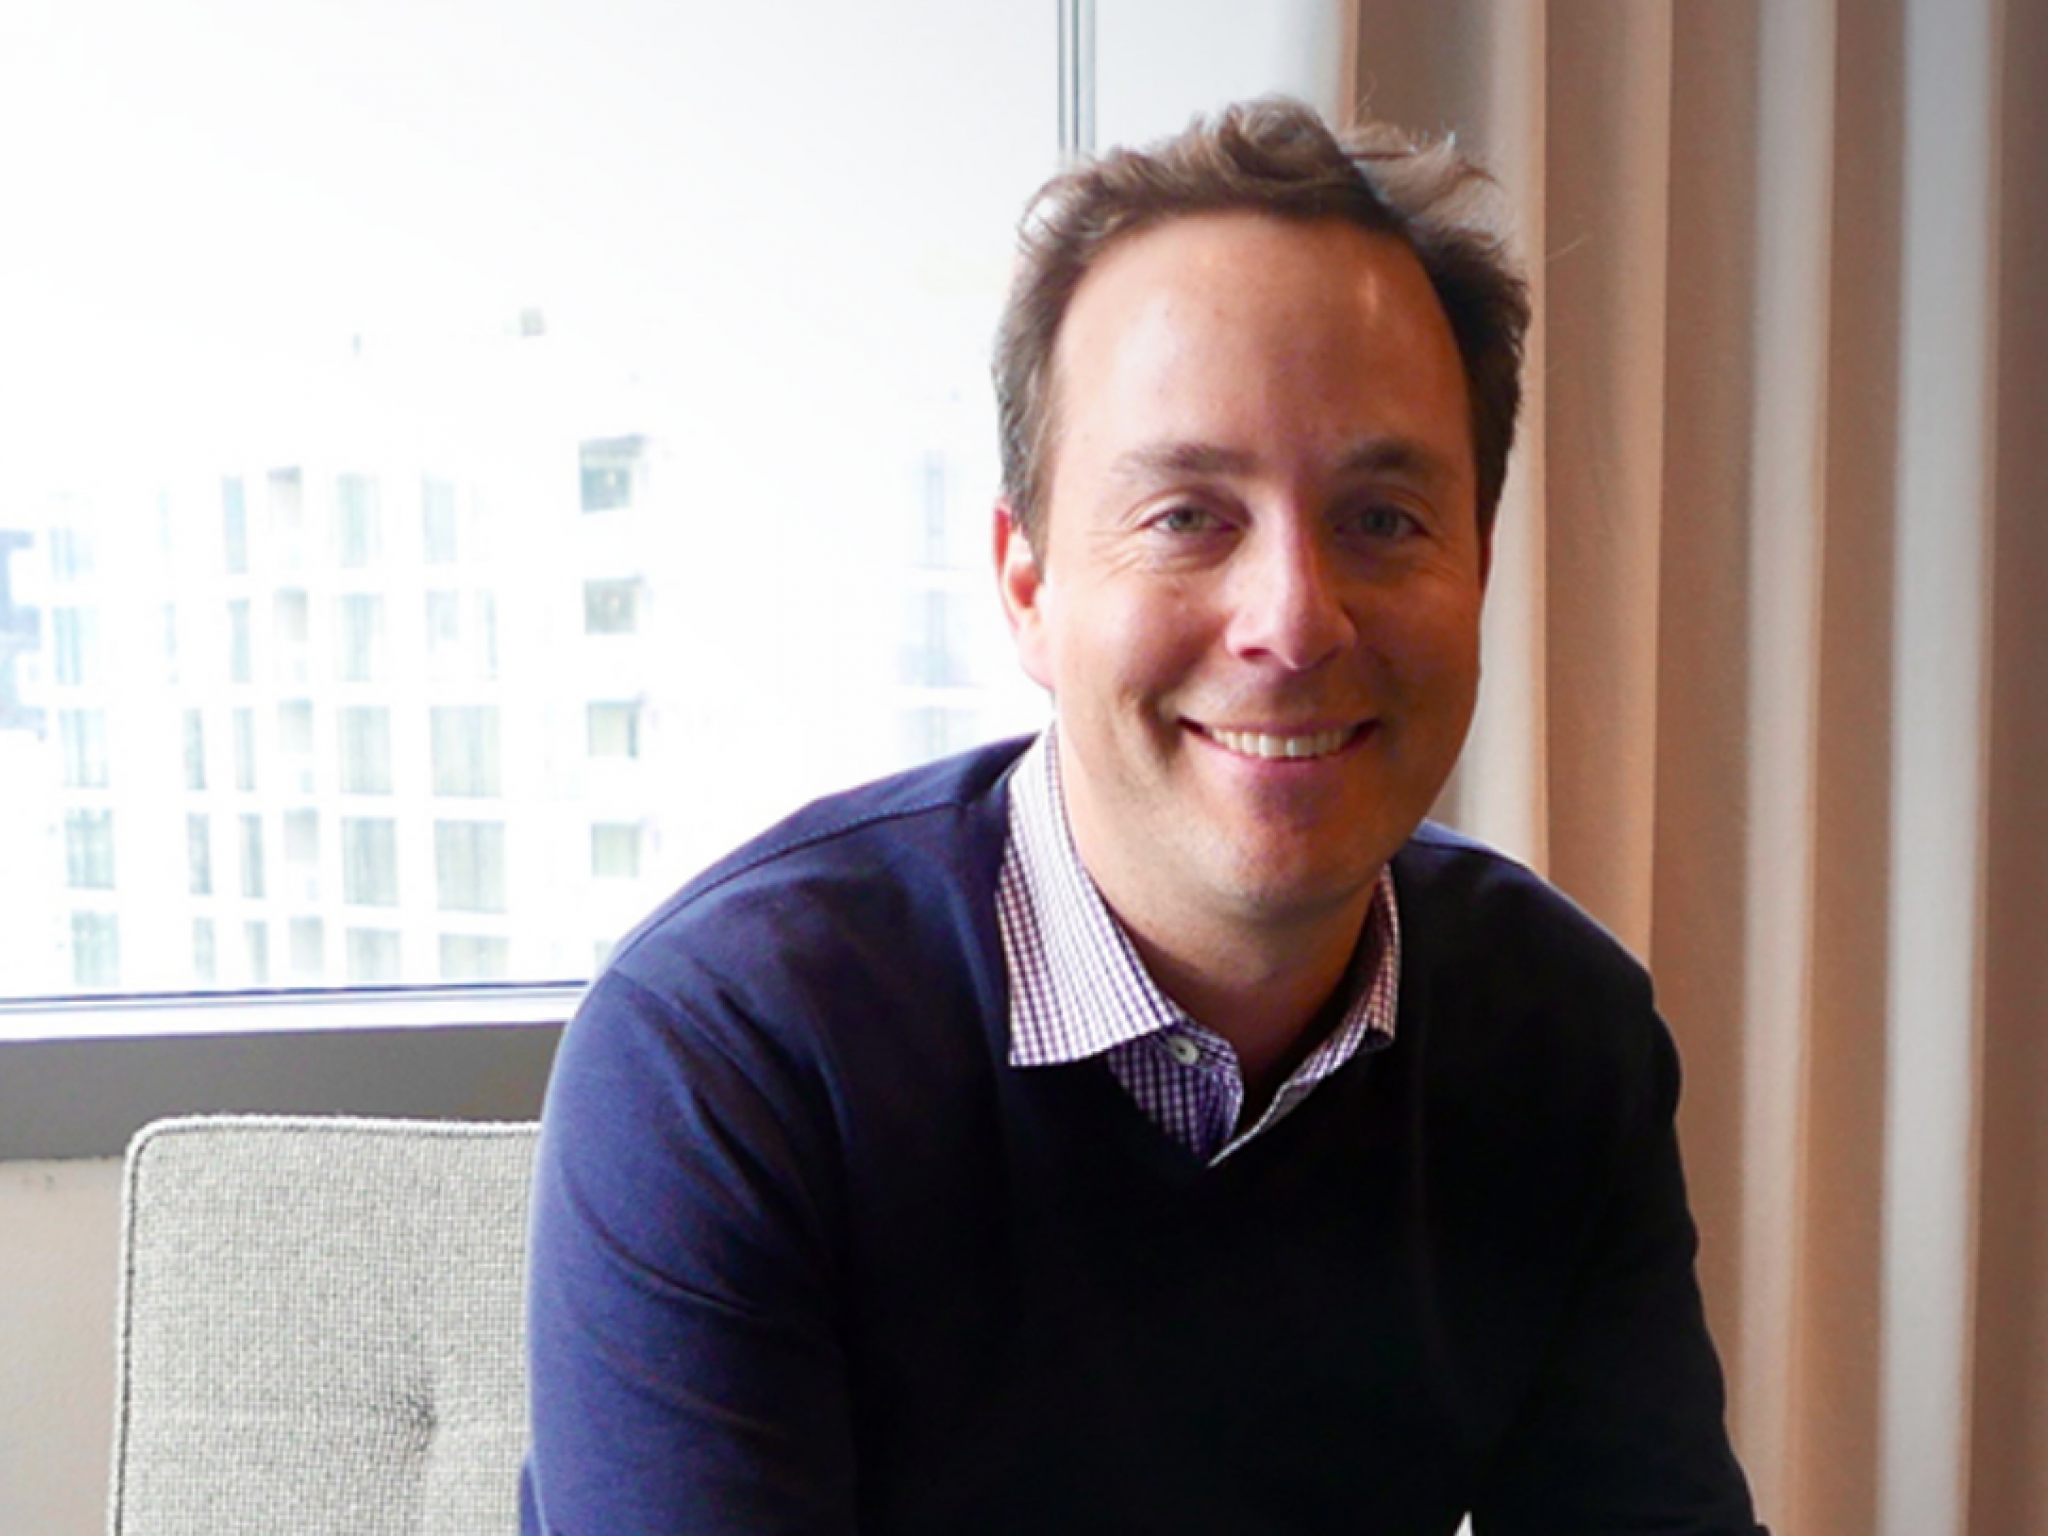  zillow-and-hotwire-founder-spencer-rascoff-launches-spac 